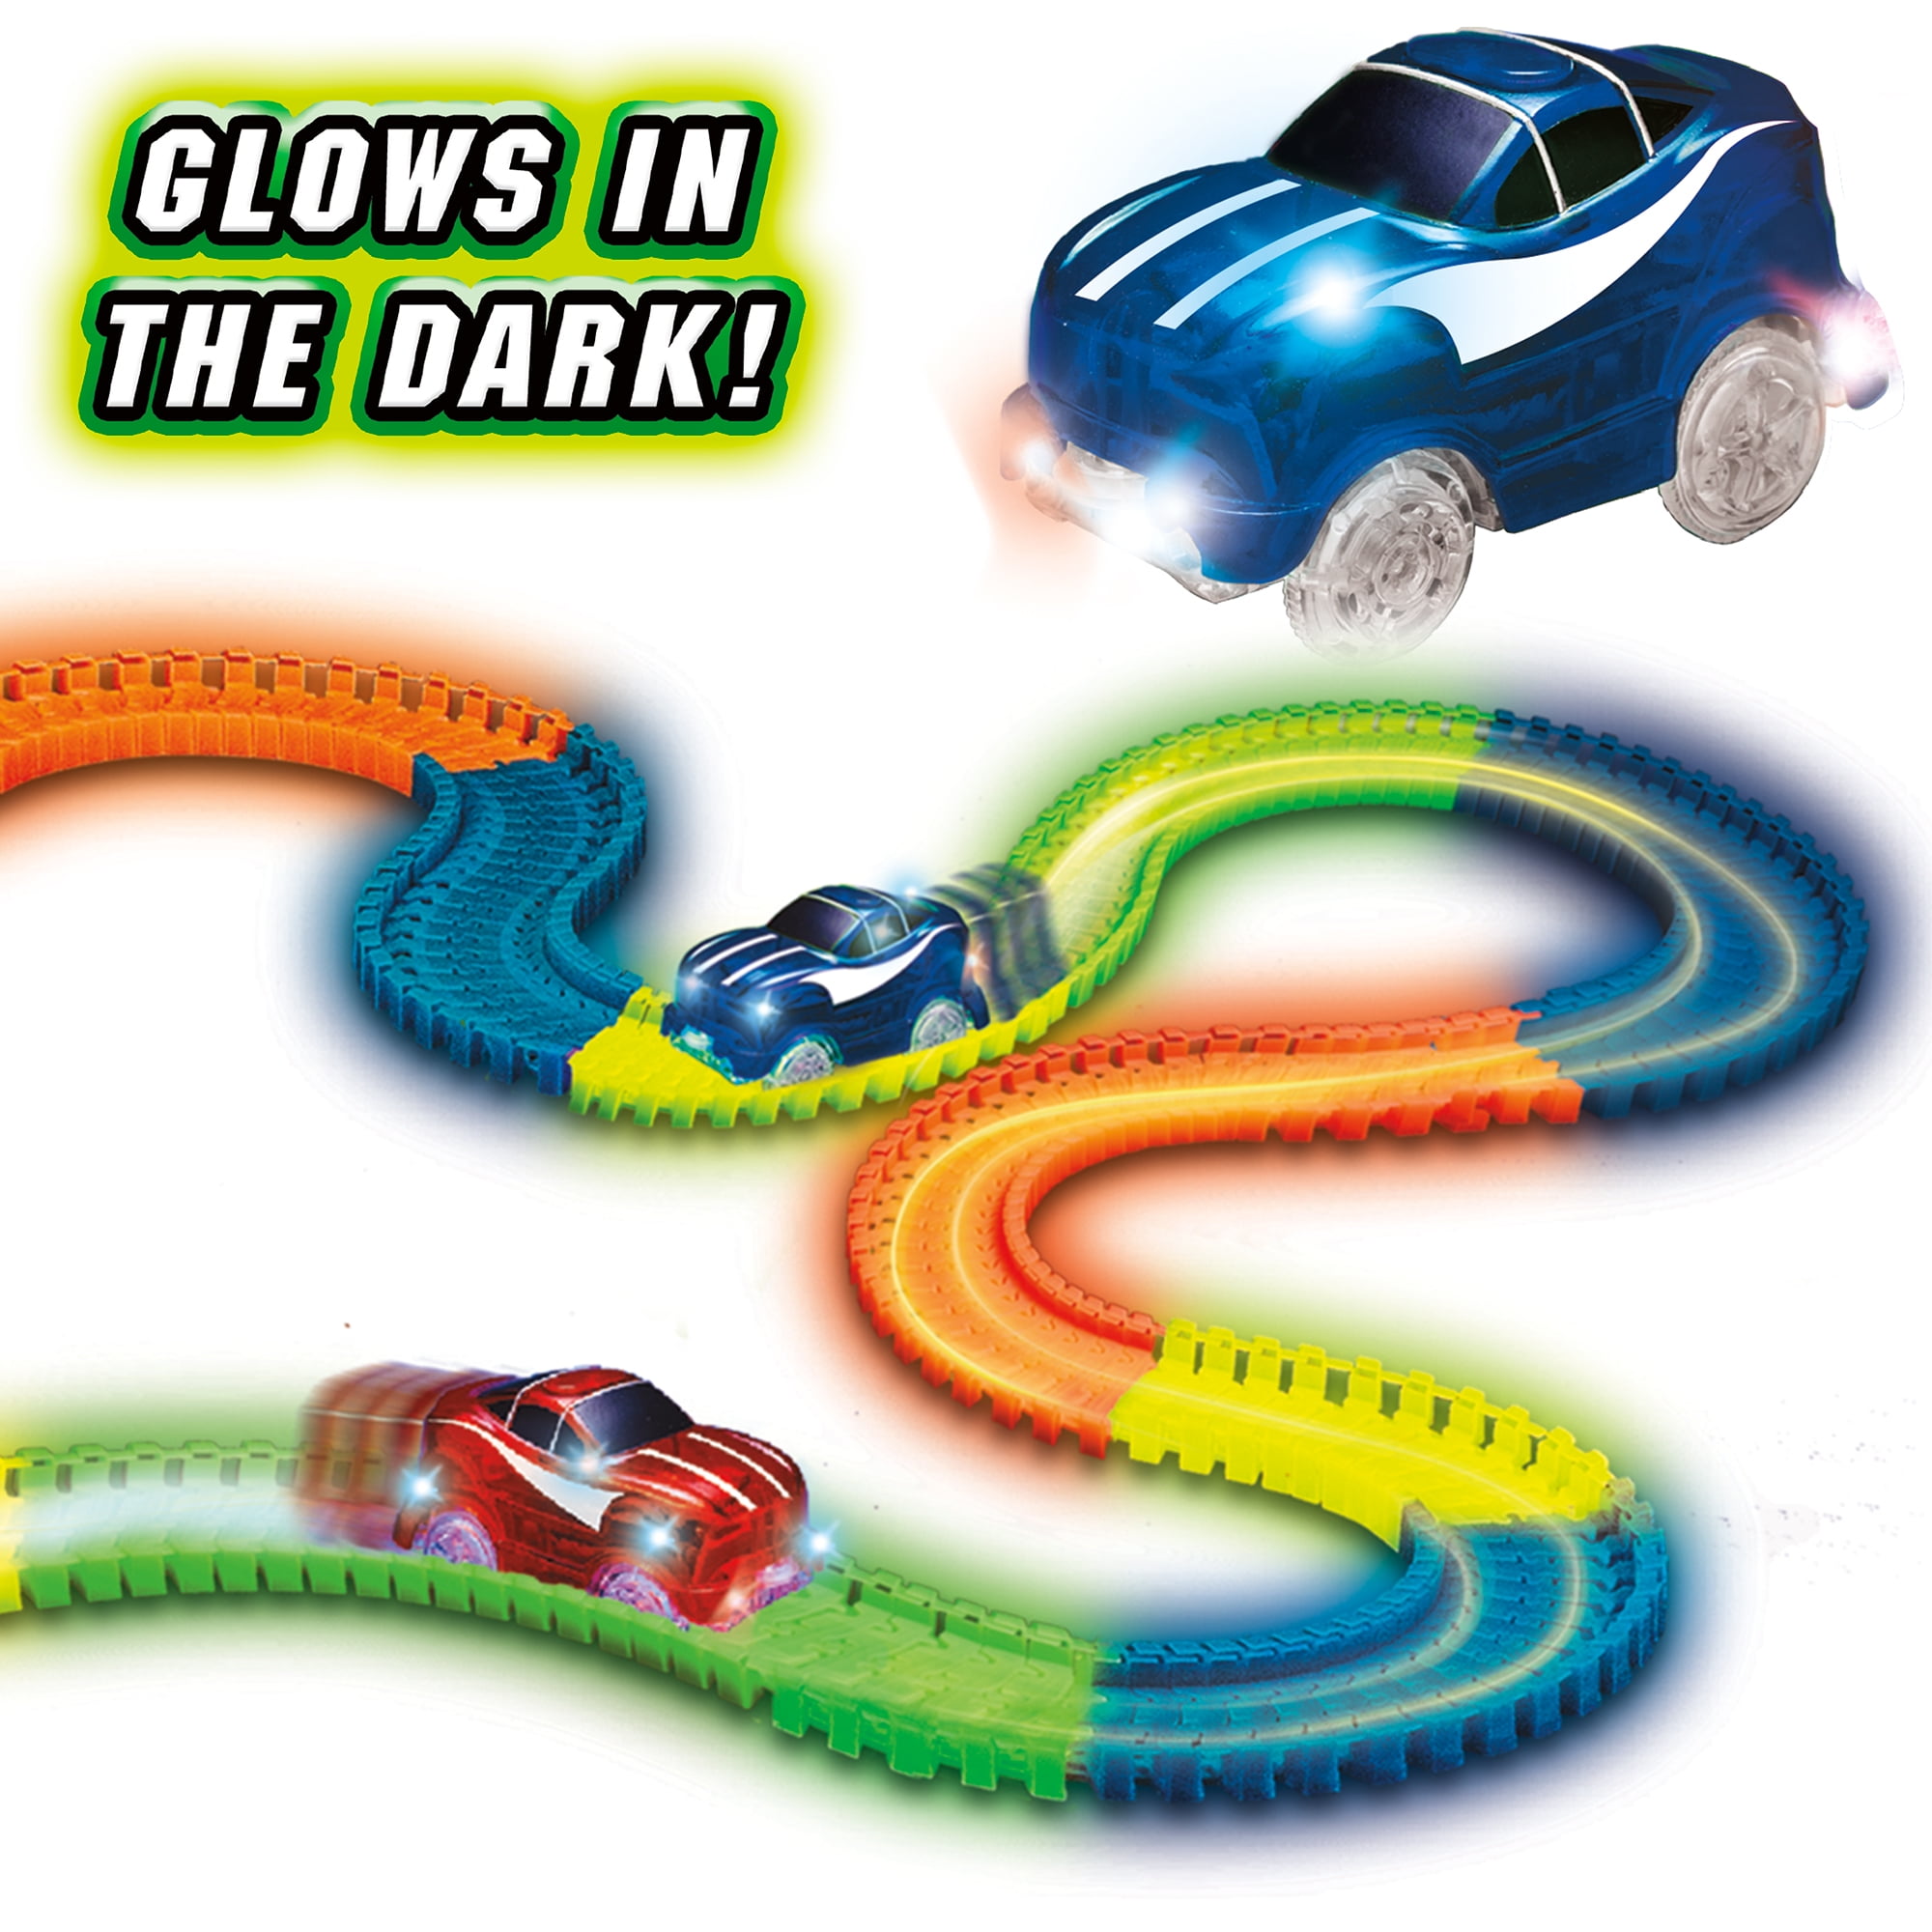 Magic Tracks CRASH set Glows in the Dark 200 Pieces 10ft Track-As Seen On TV 